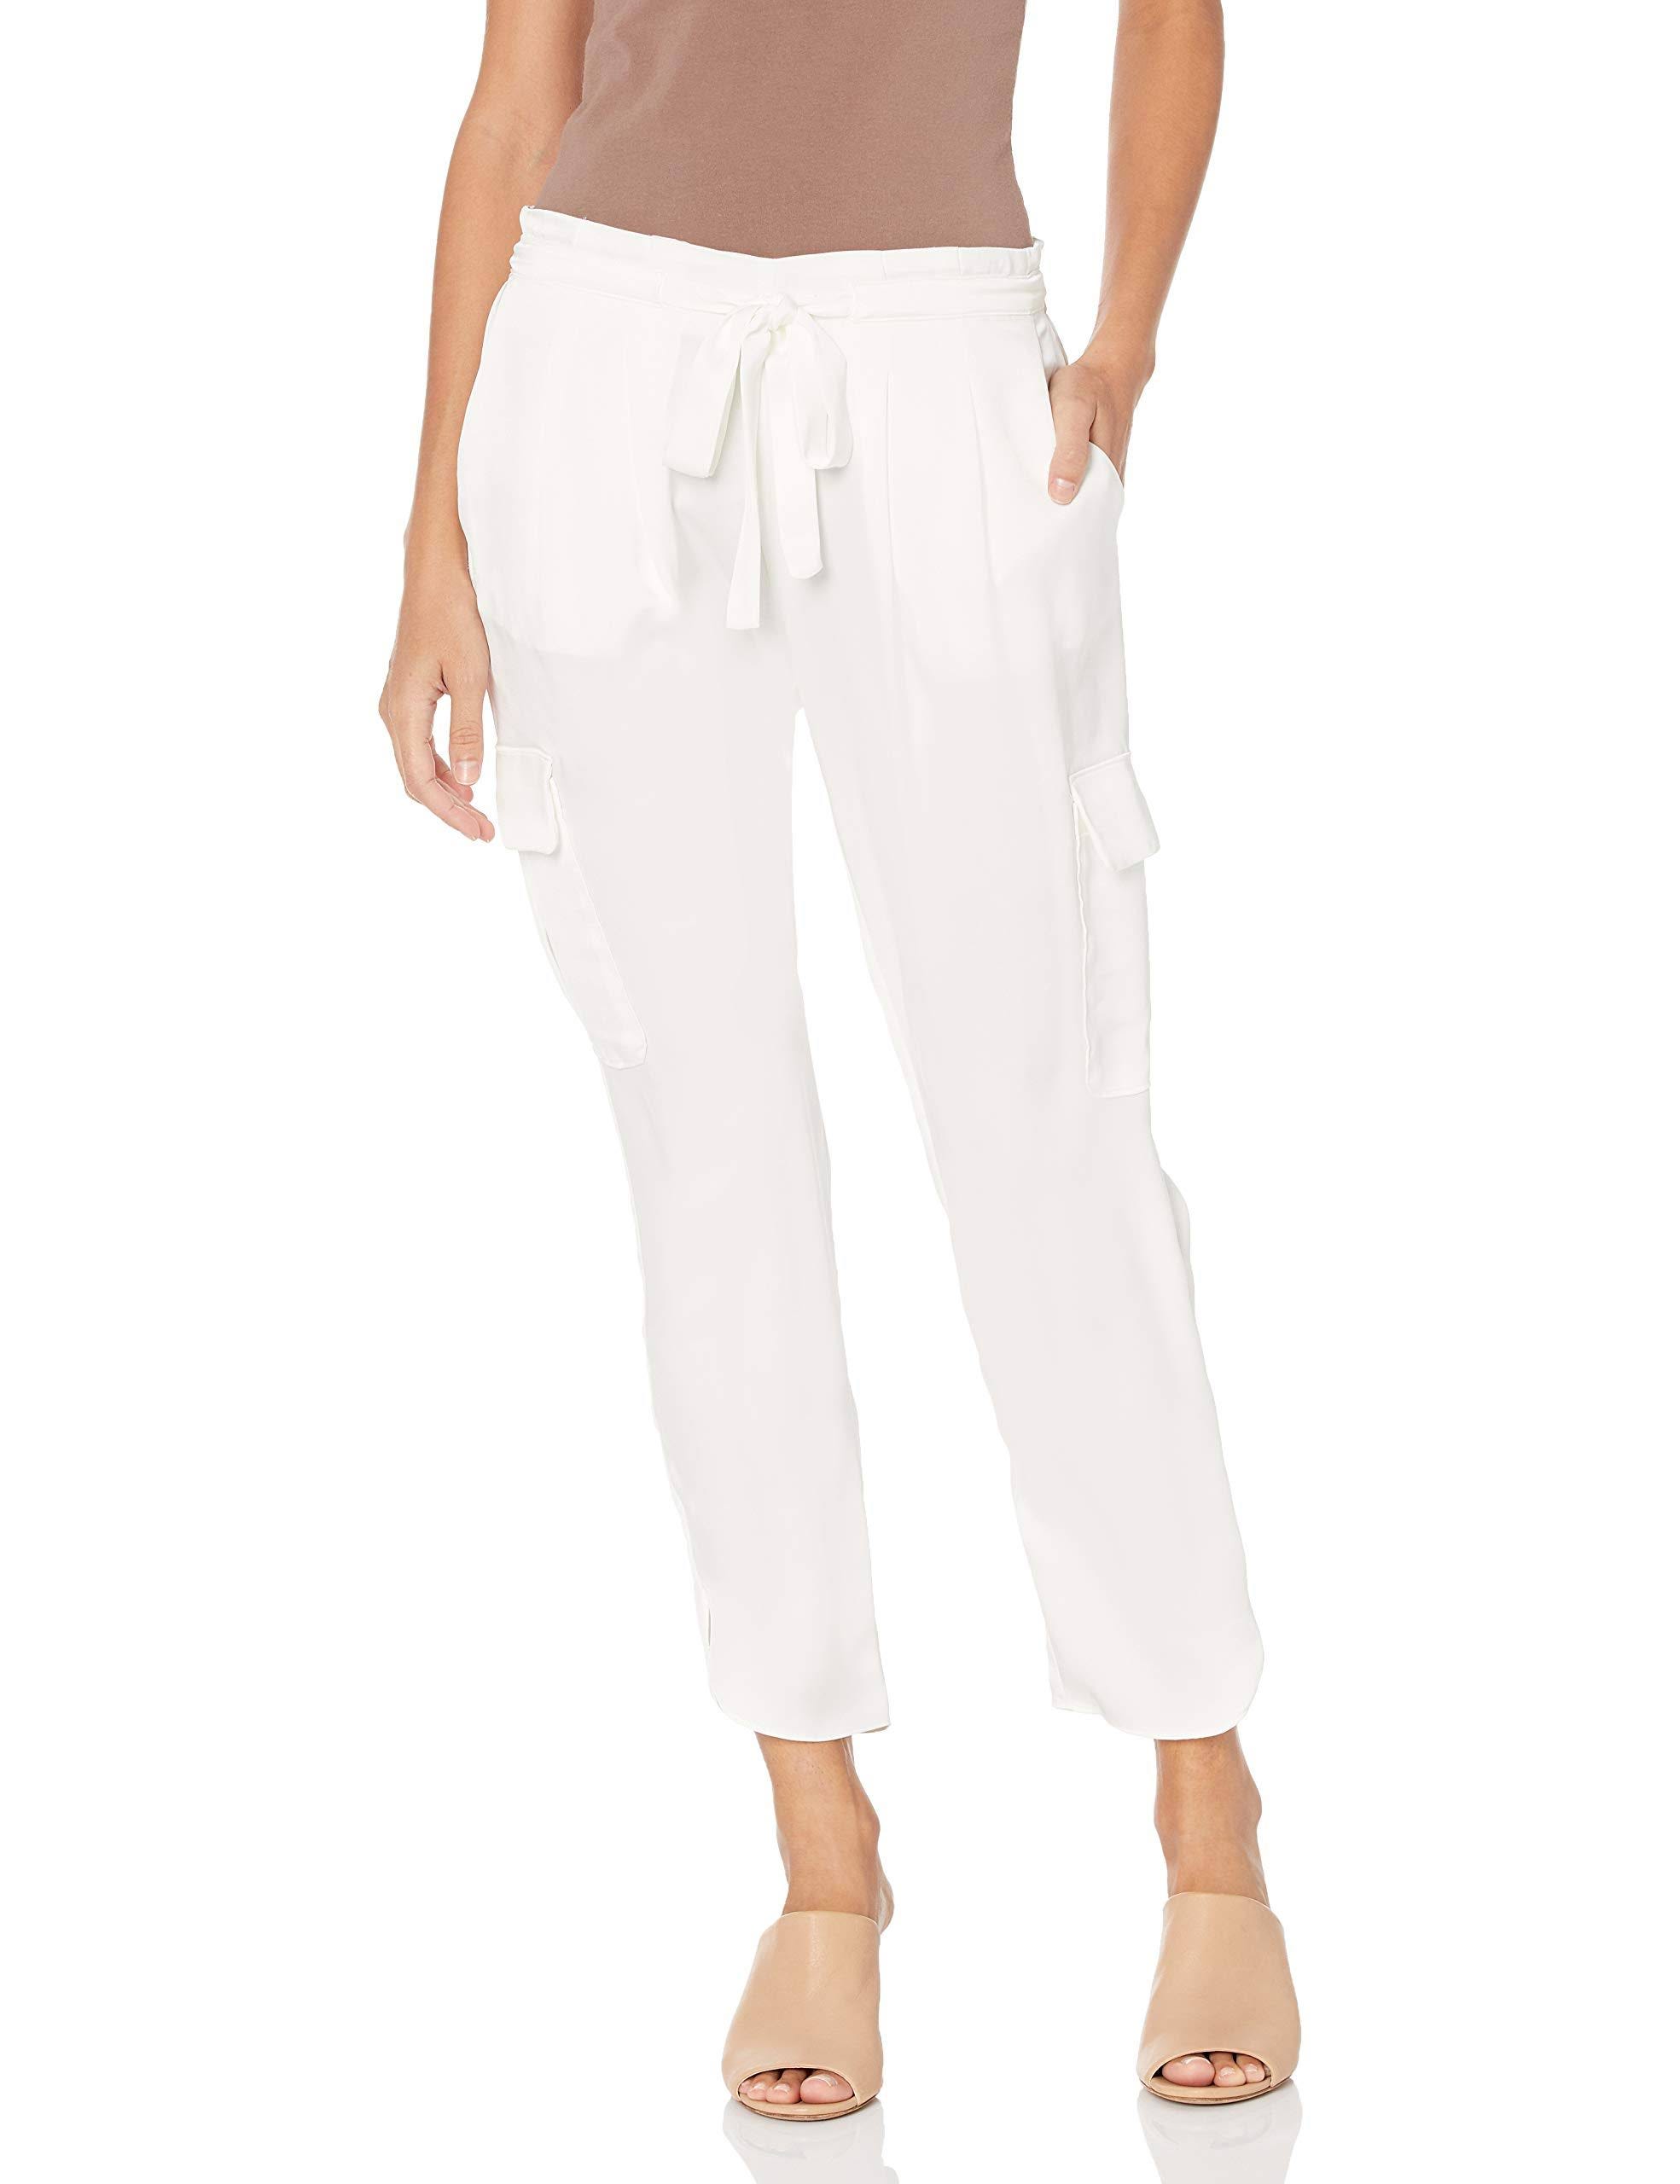 Elevated White Satin Cargo Pants with Comfortable Drawstring Closure | Image